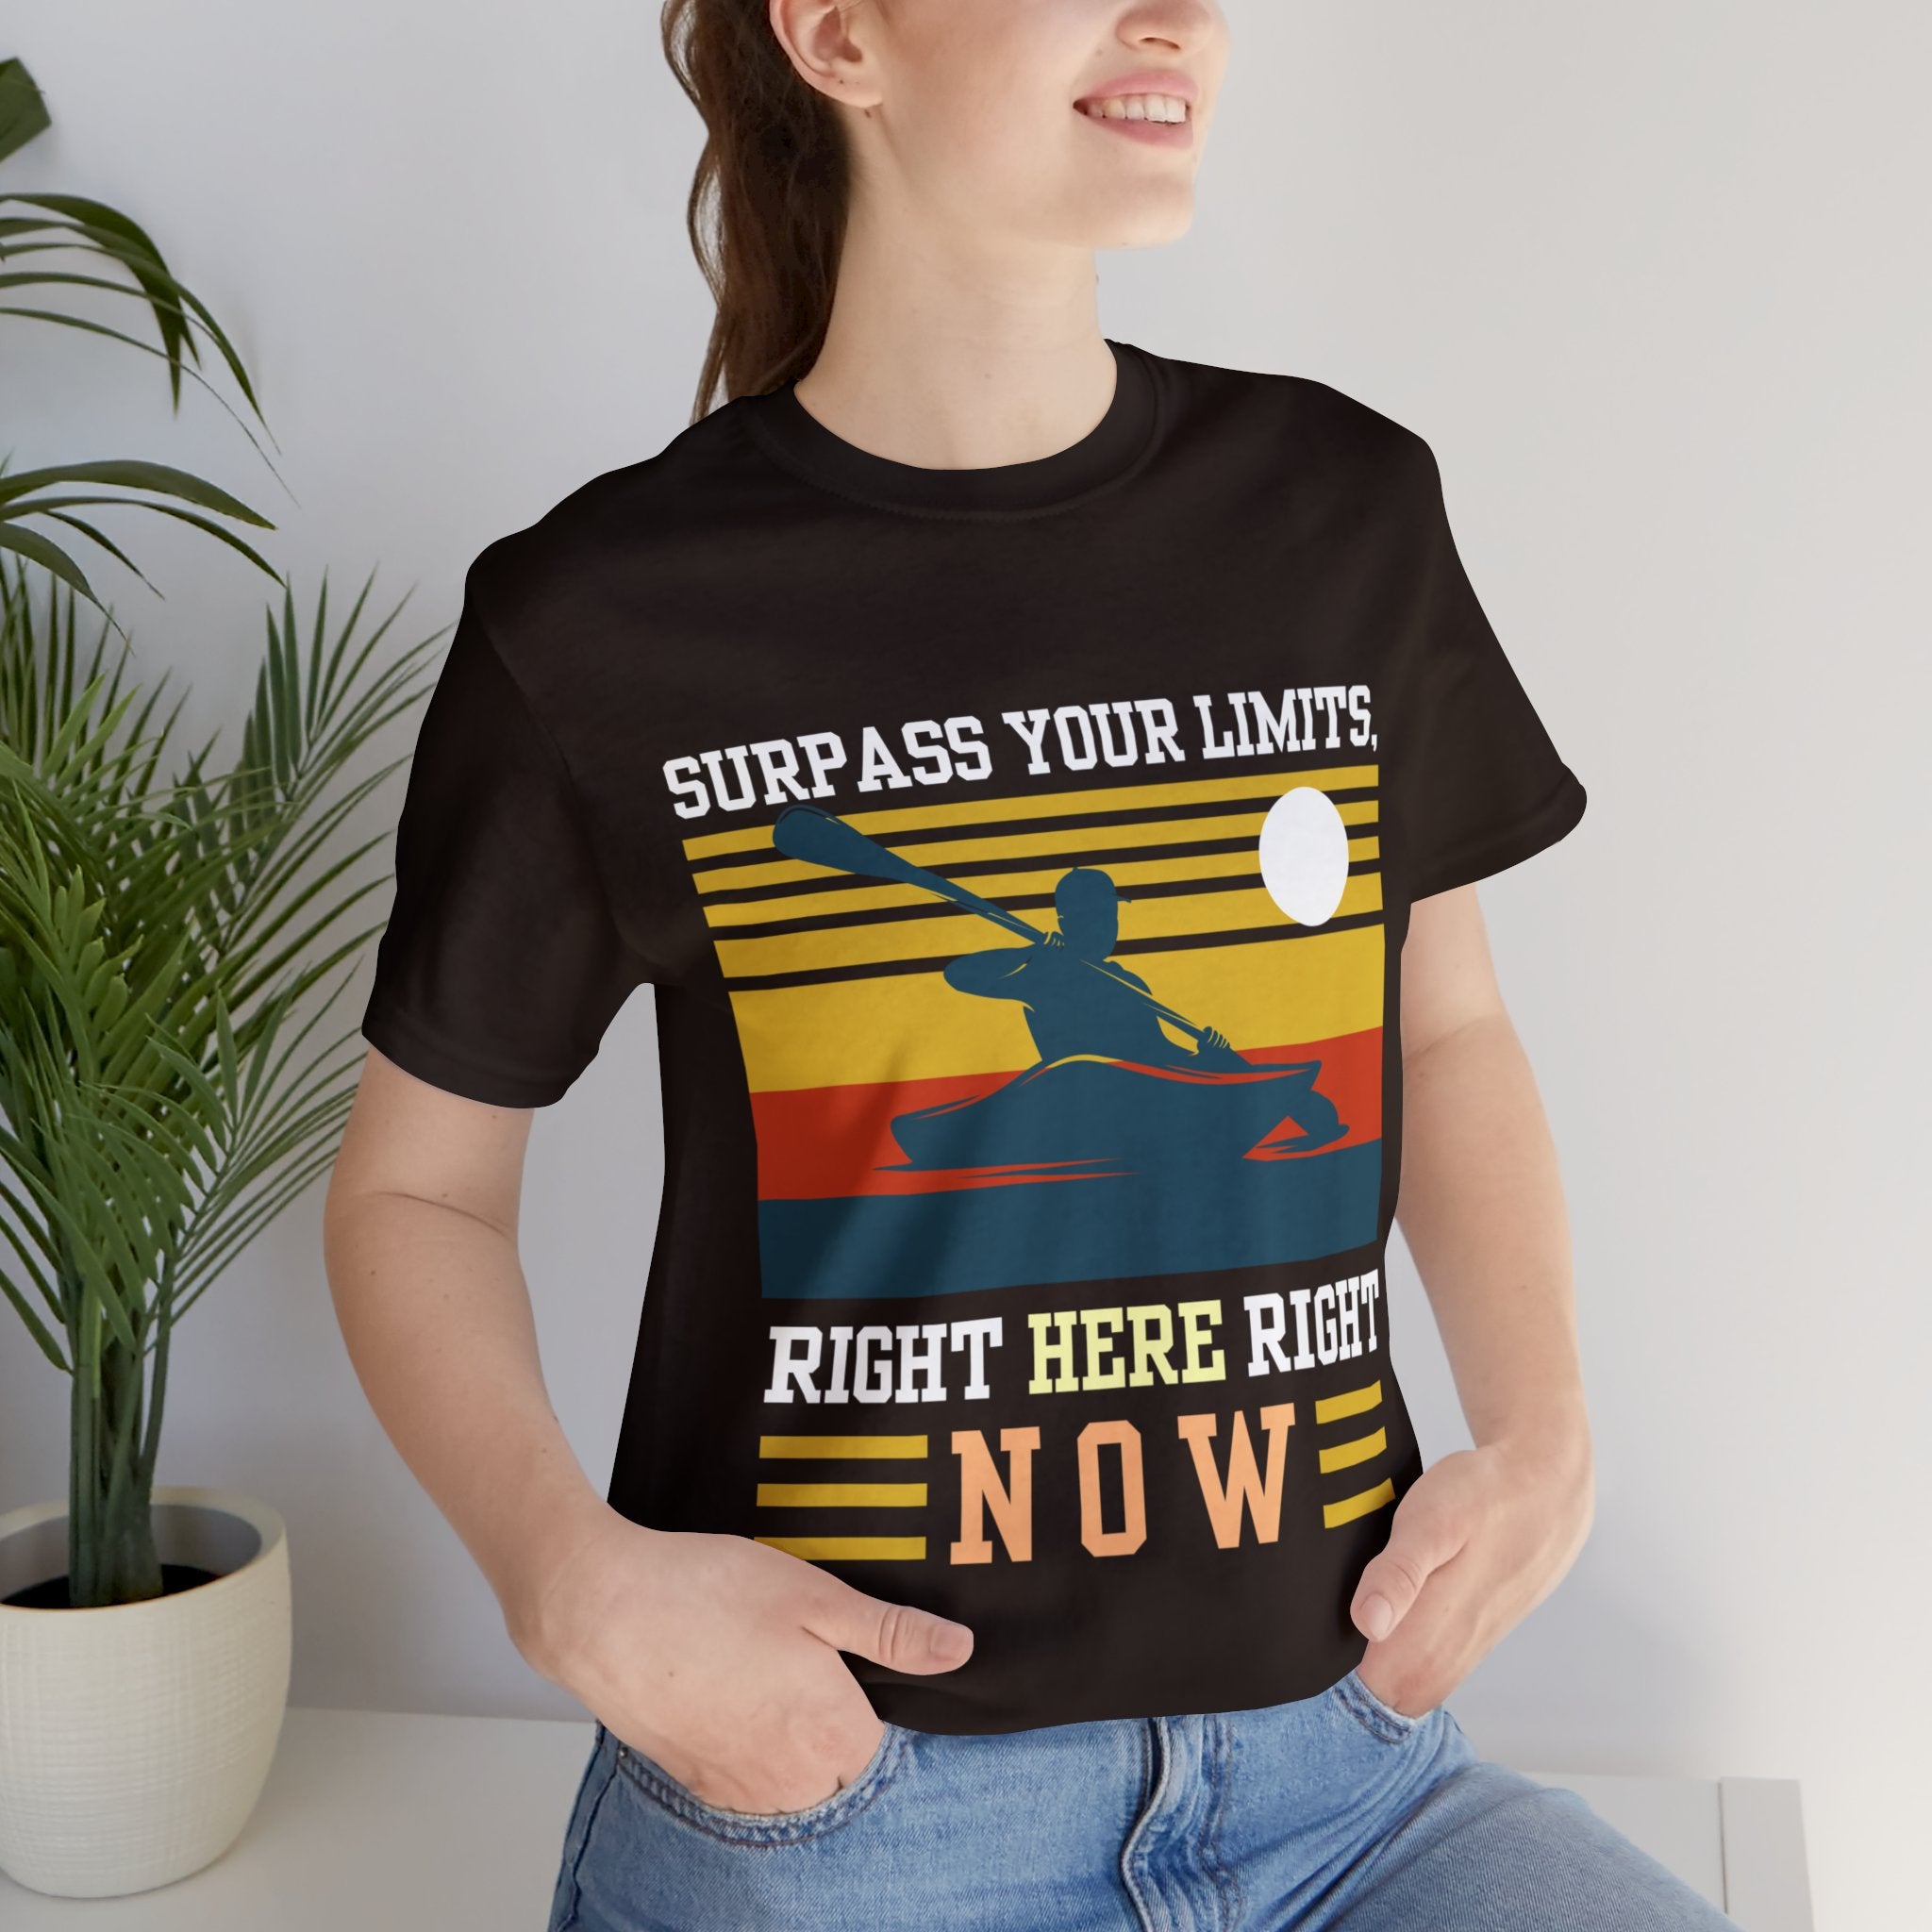 Surpass Your Limits | Printed Inspirational Quote Women T-shirts